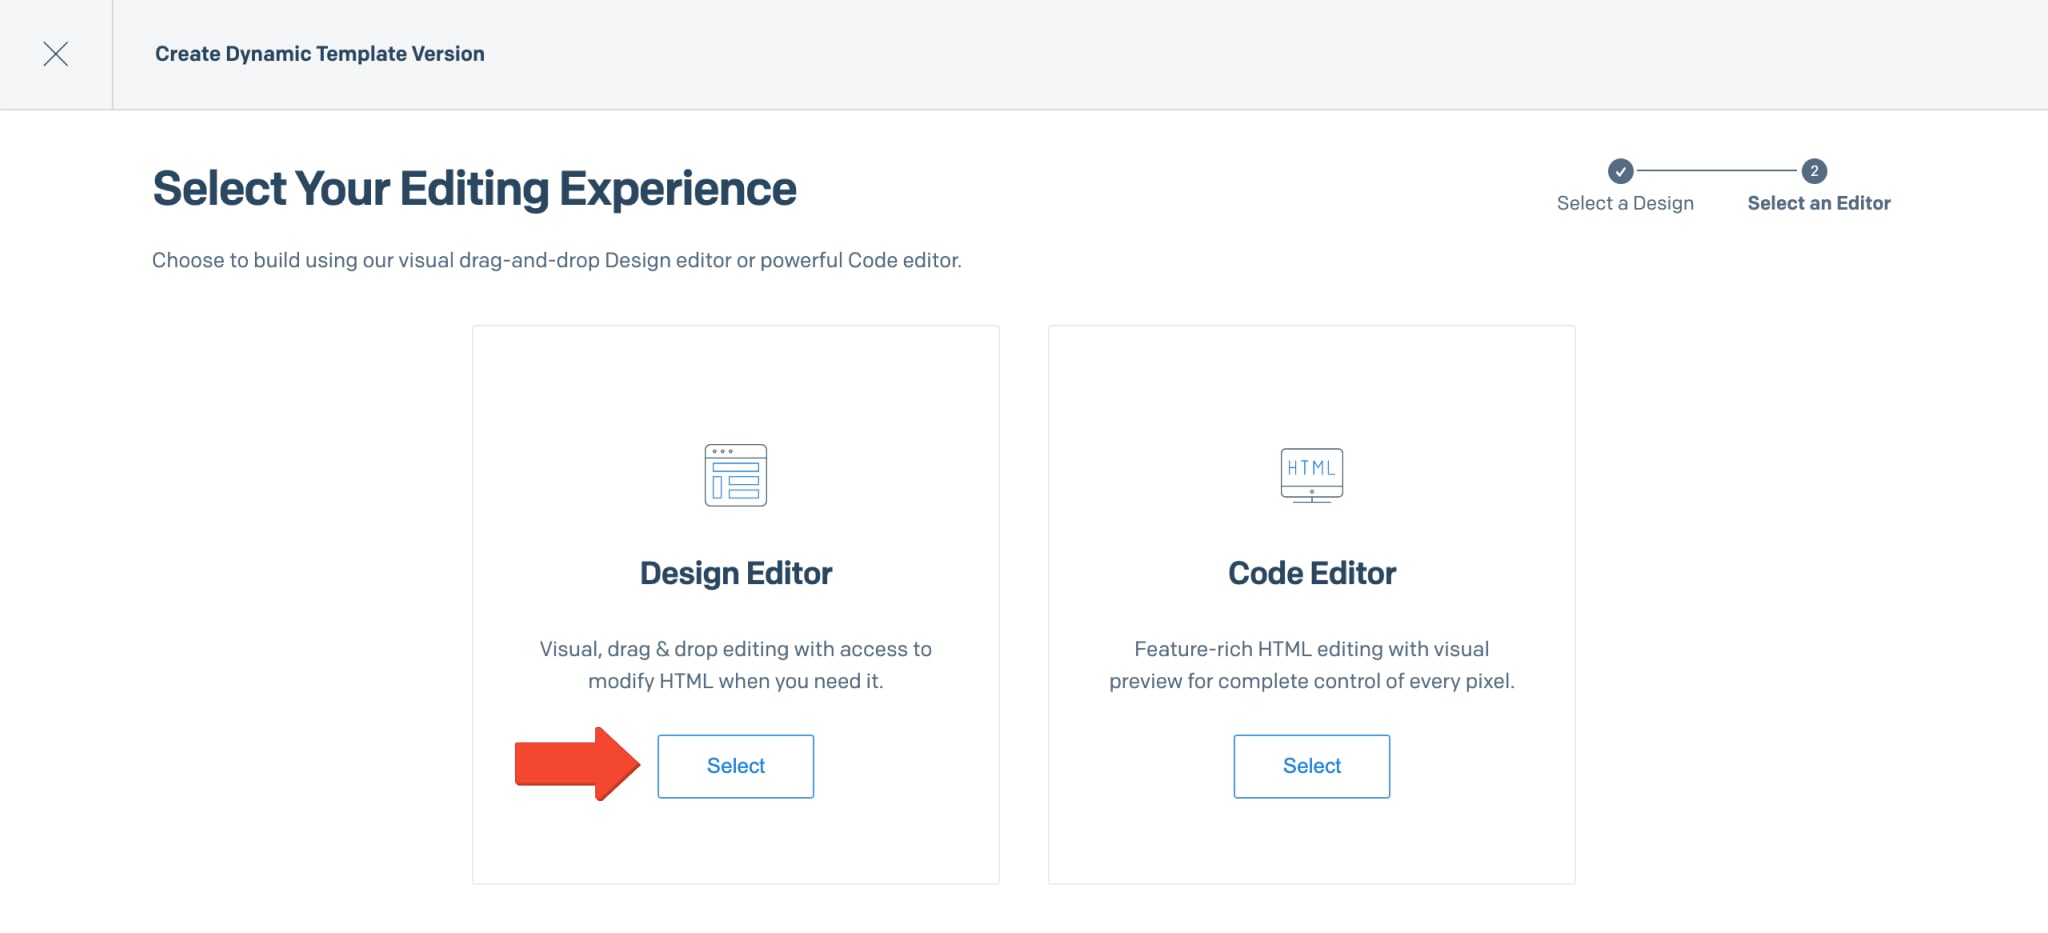 SendGrid Design Editor allows you to create email templates using the Visual Editor.